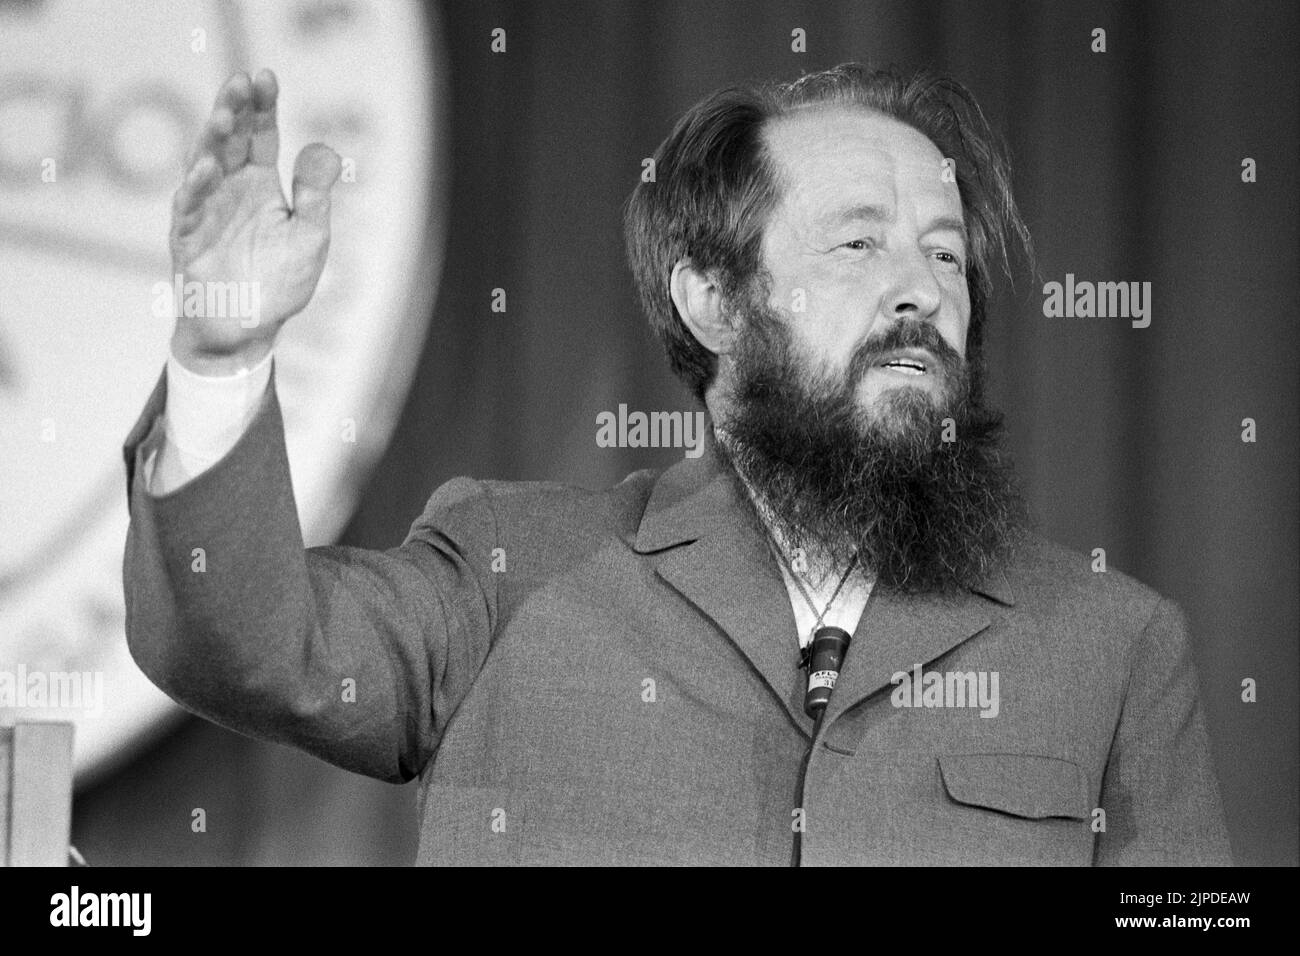 Soviet dissident Aleksandr Solzhenitsyn speaking at a meeting of the AFL-CIO in Washington, D.C., delivering his Warning to the West speech on June 30, 1975. (USA) Stock Photo